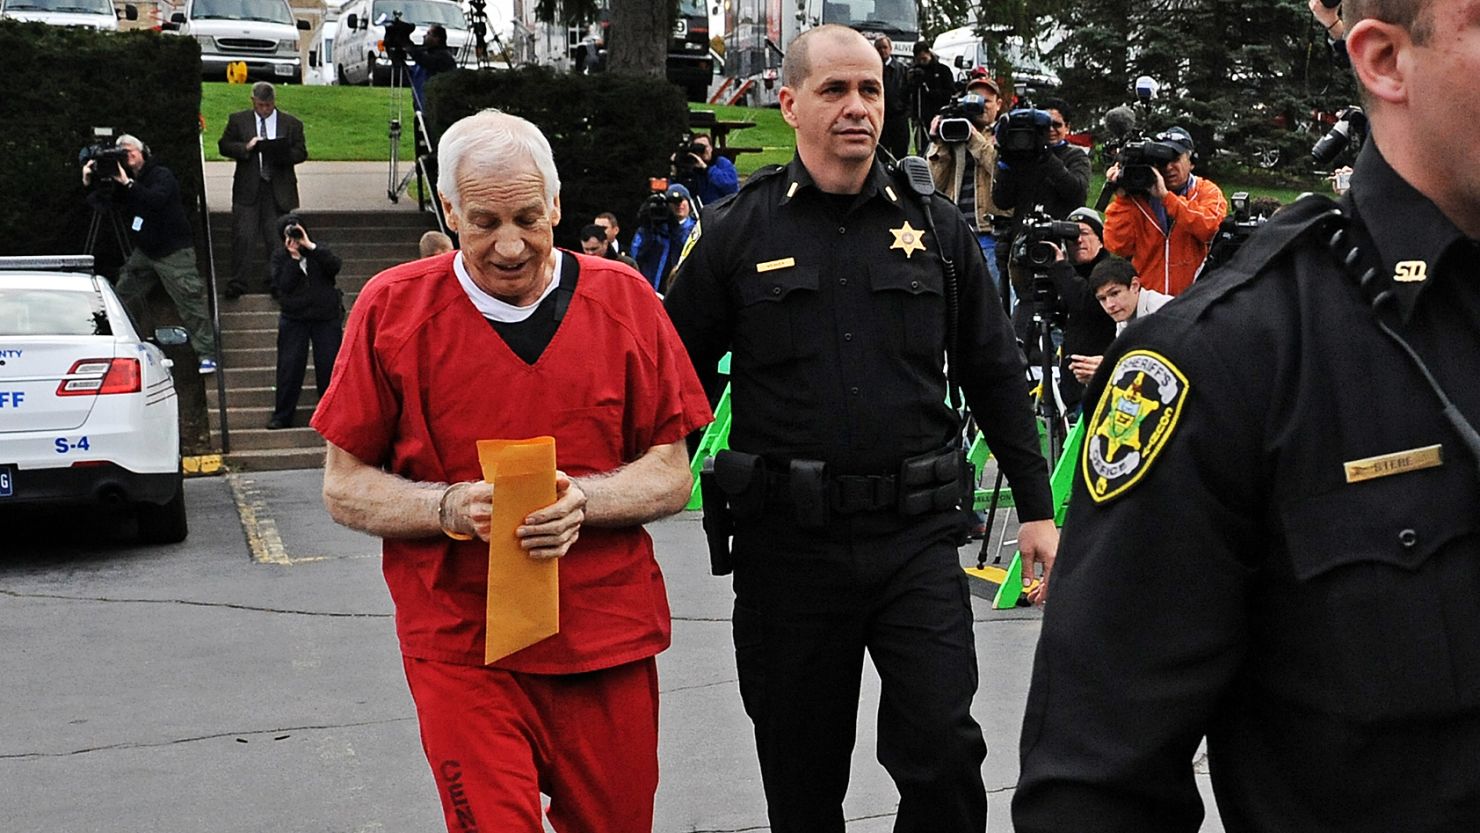 Judge rejects new trial for Sandusky CNN